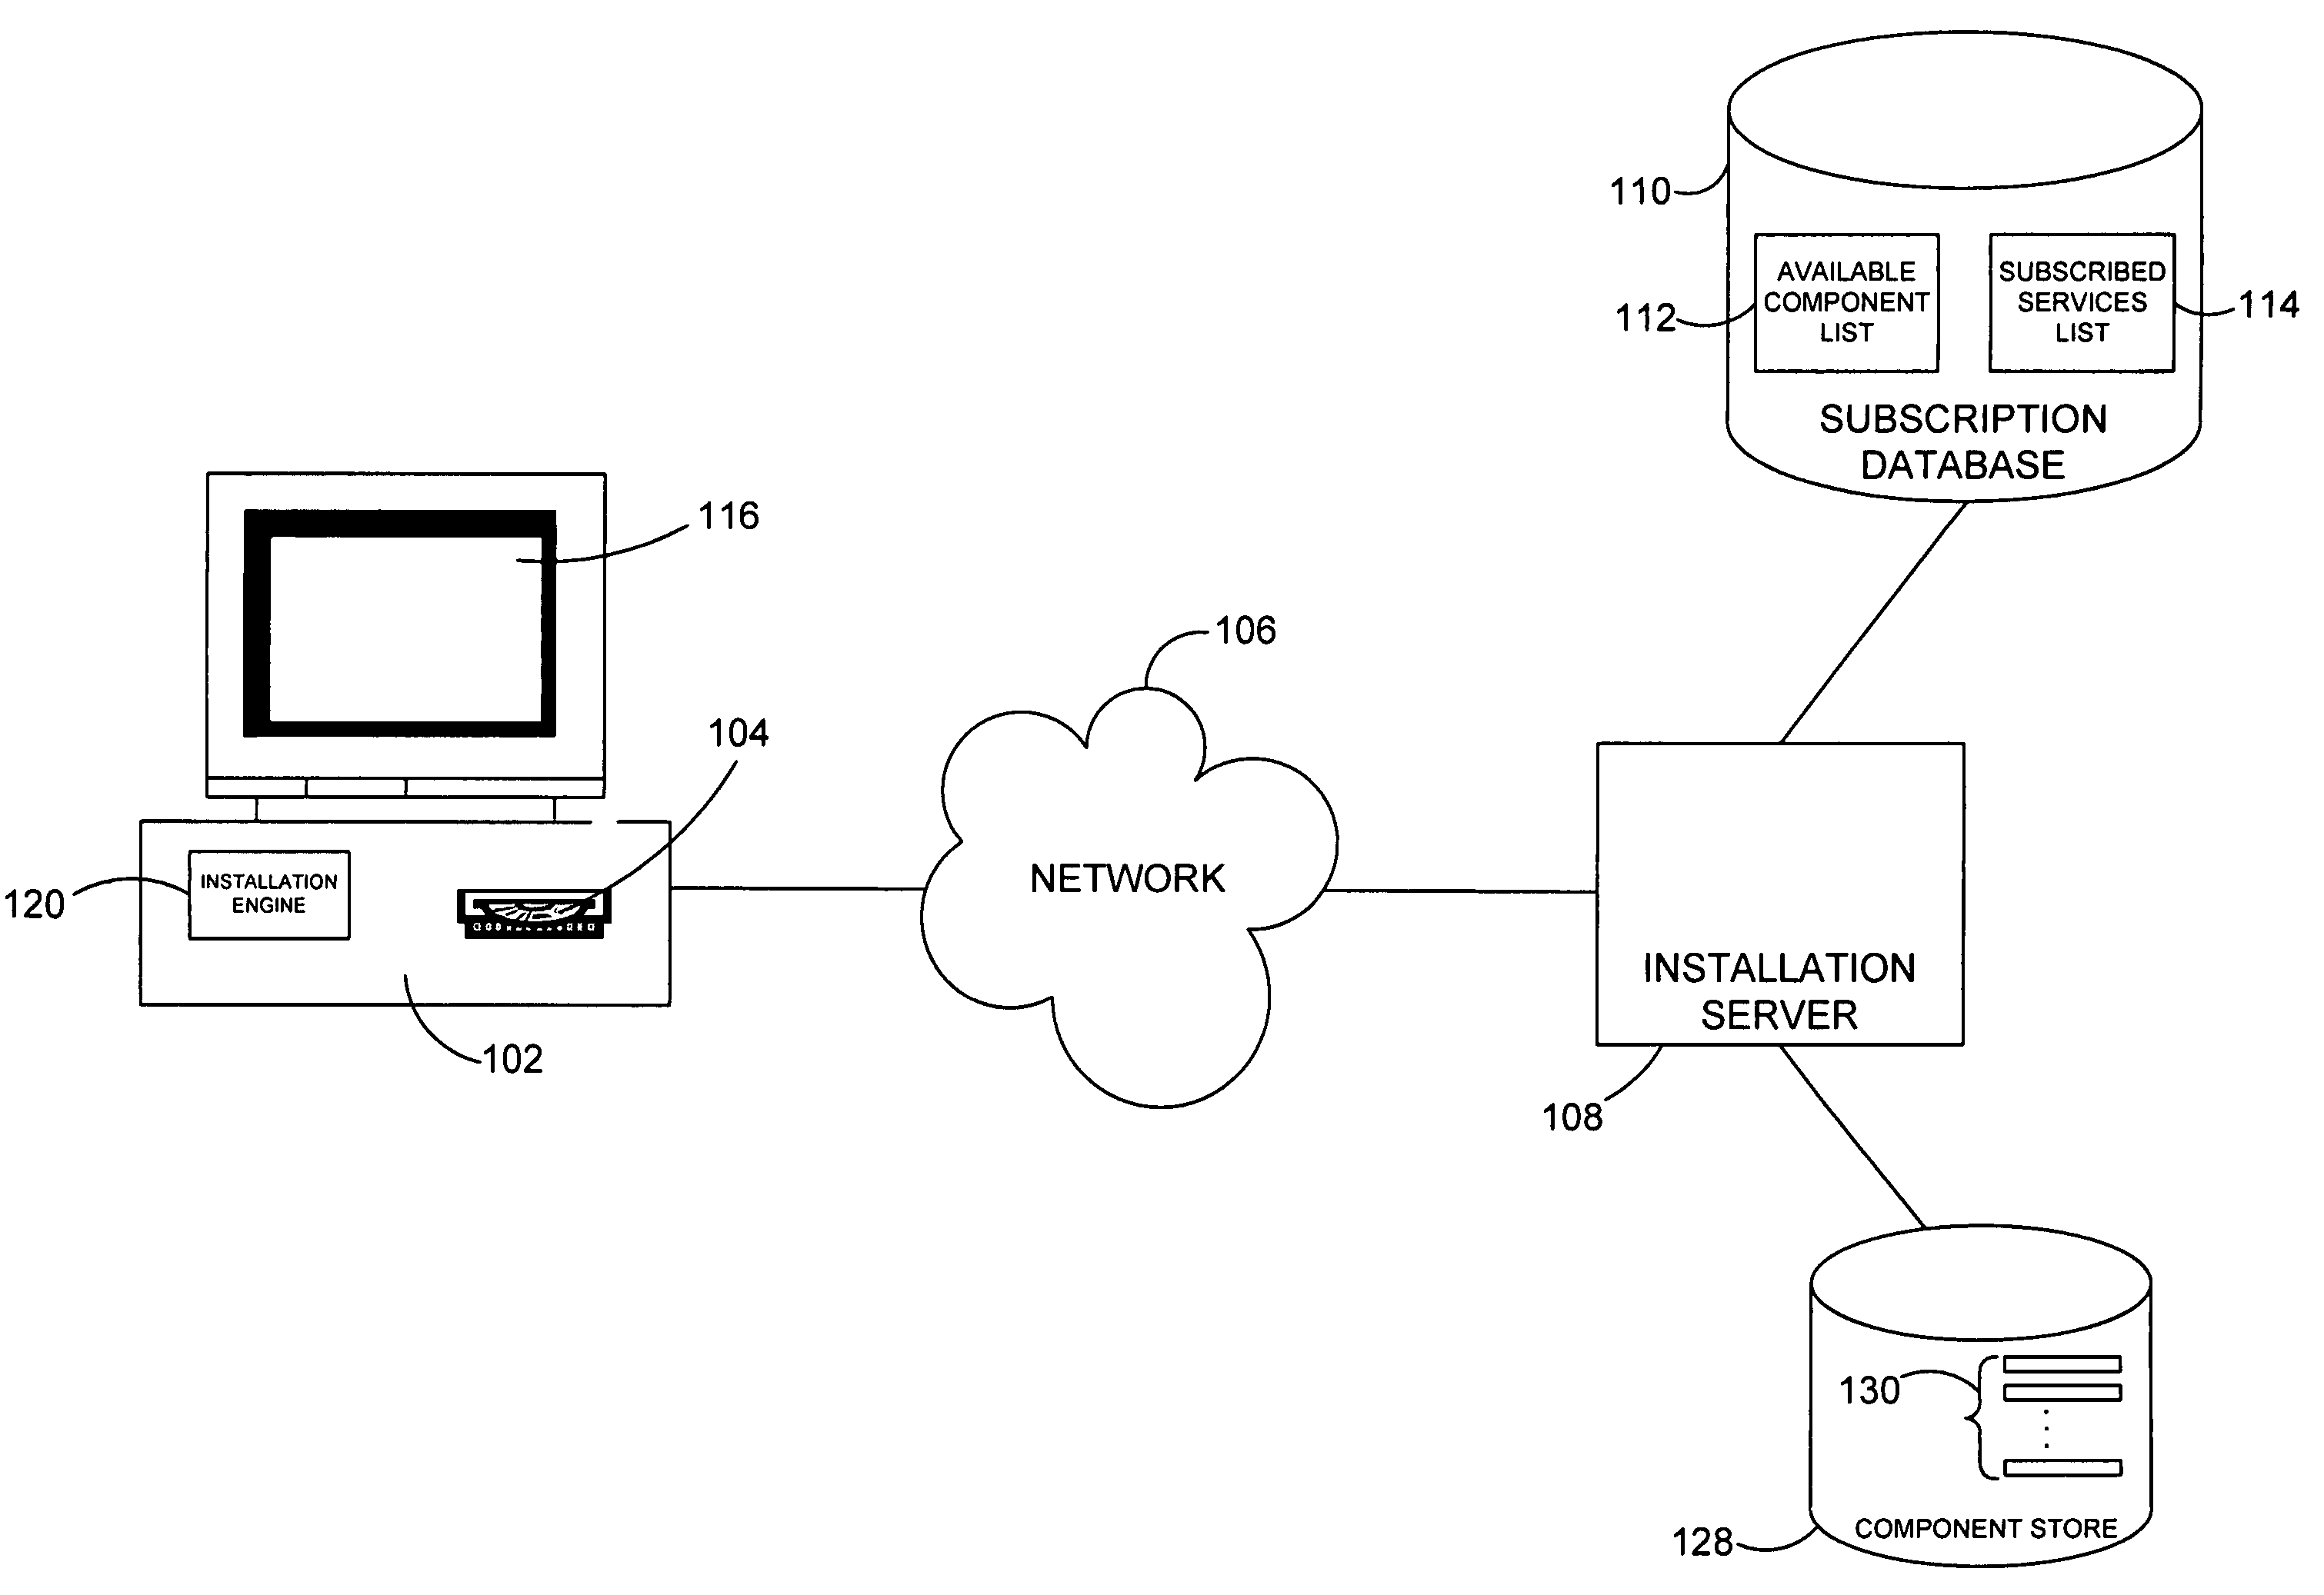 System and method for automatically generating networked service installation based on subscription status